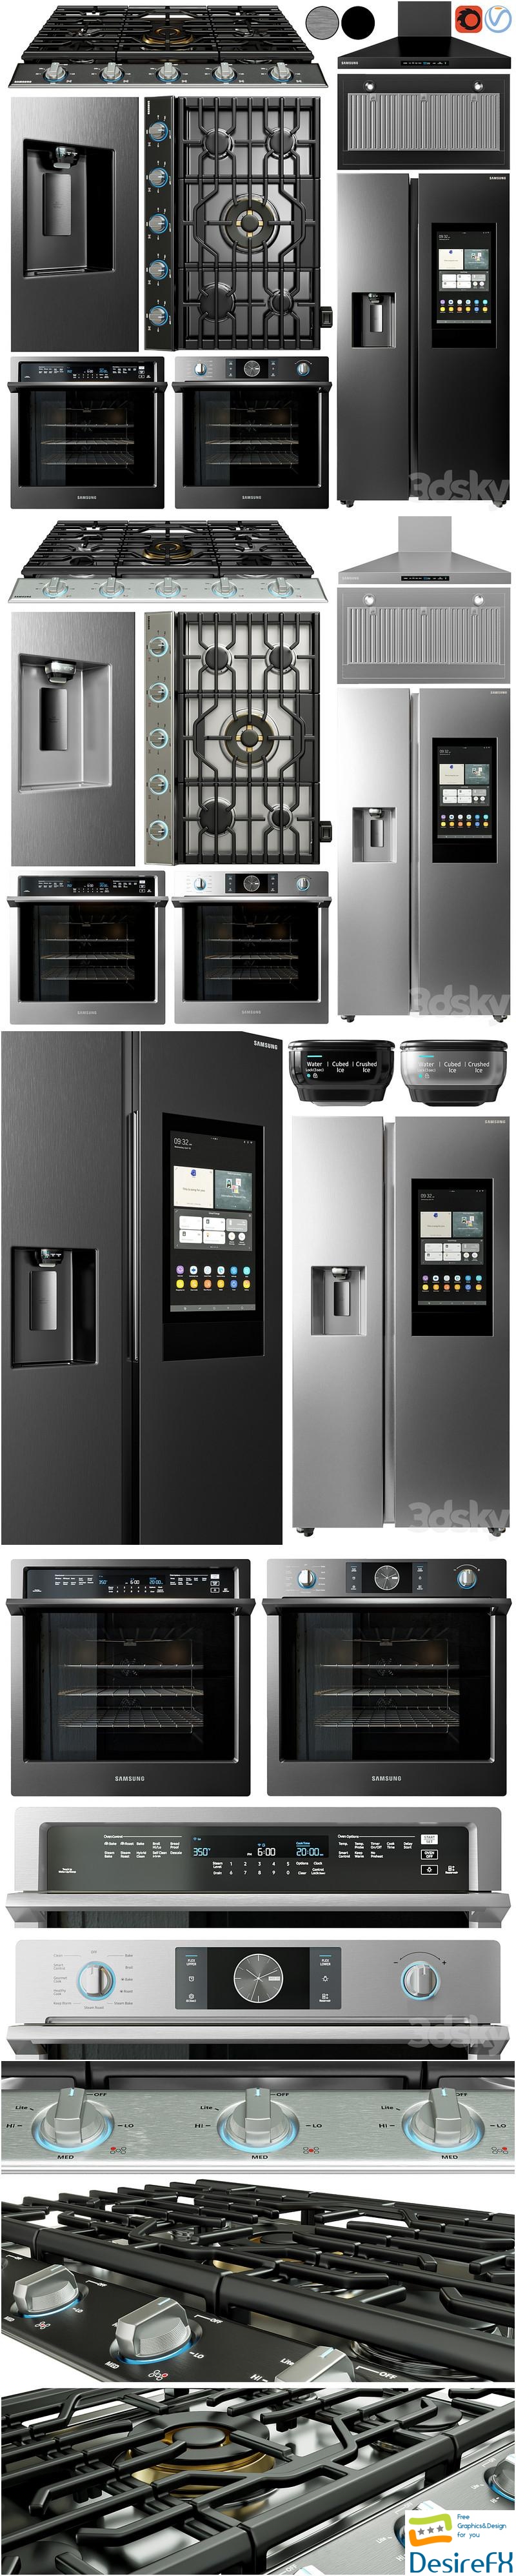 Samsung appliance collection 3D Model